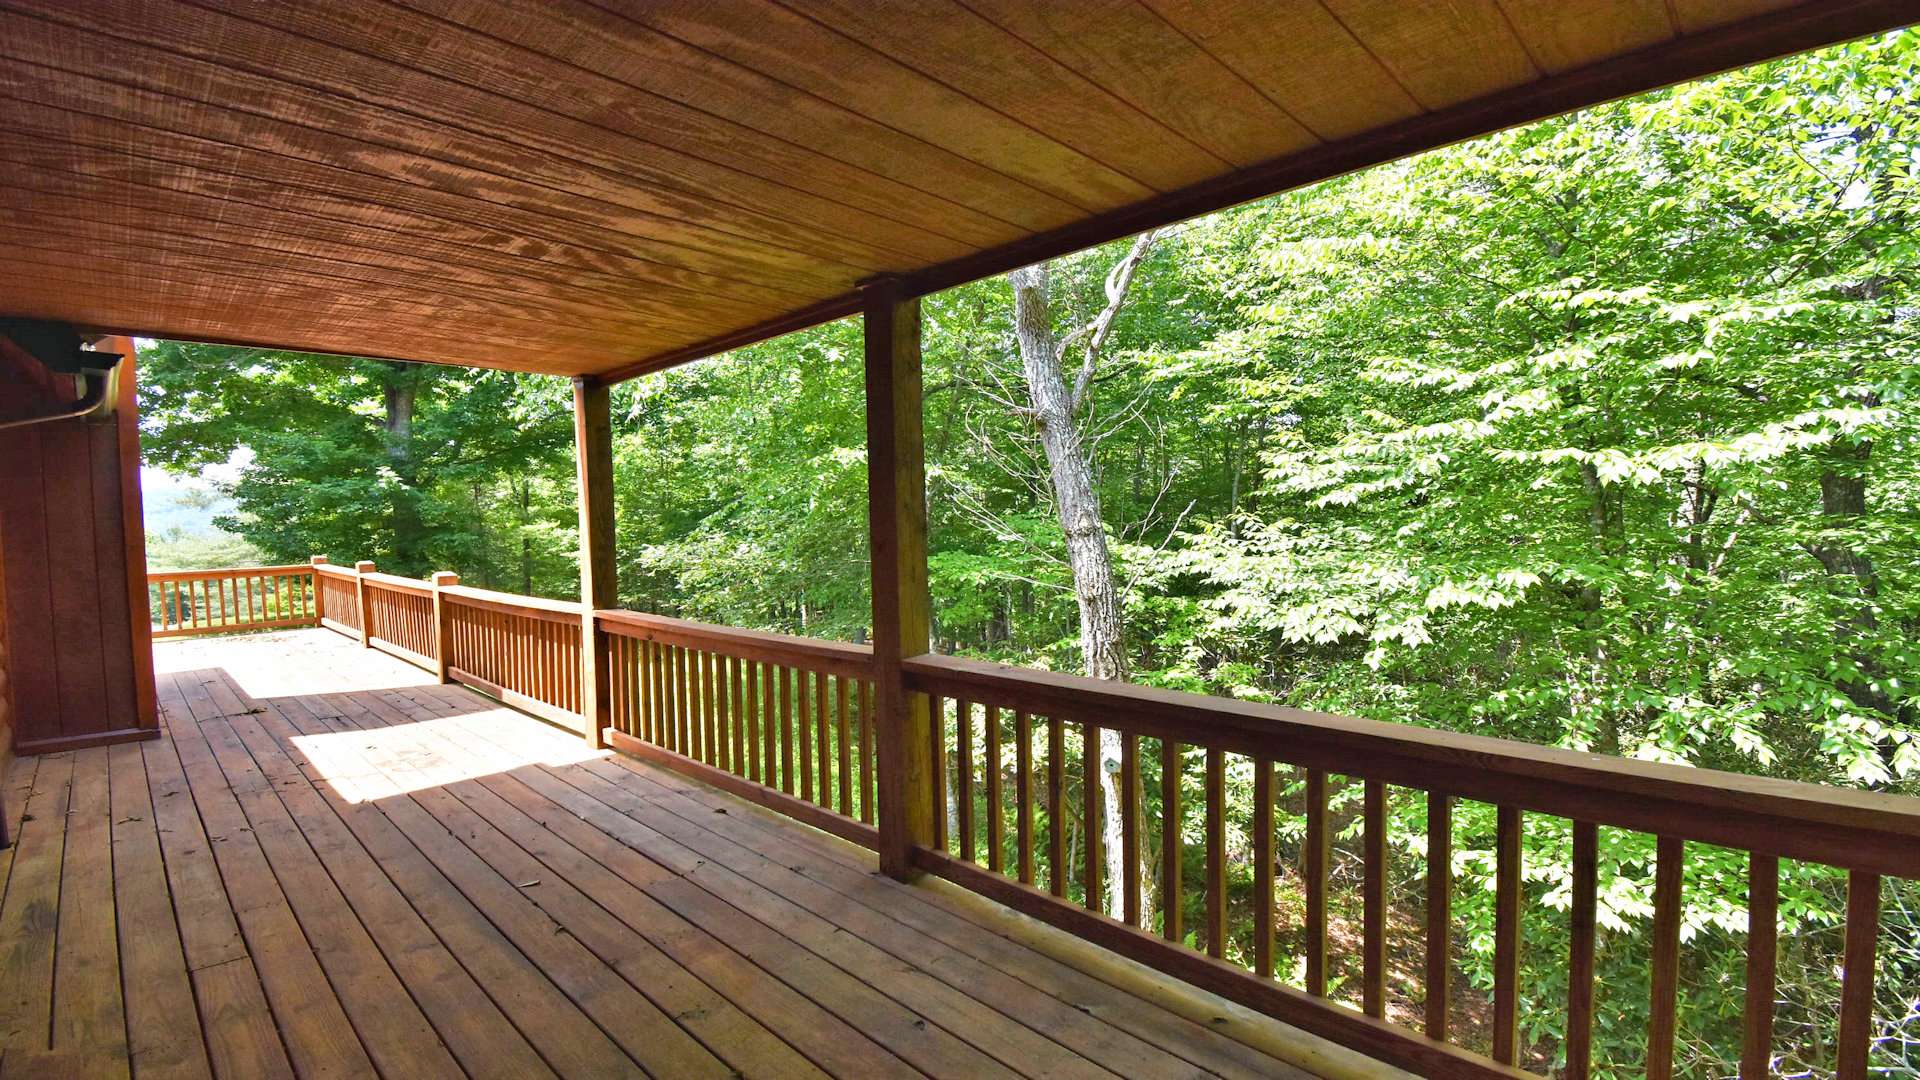 The covered front porch wraps around to the open side deck.  Plenty of room for outdoor entertaining.